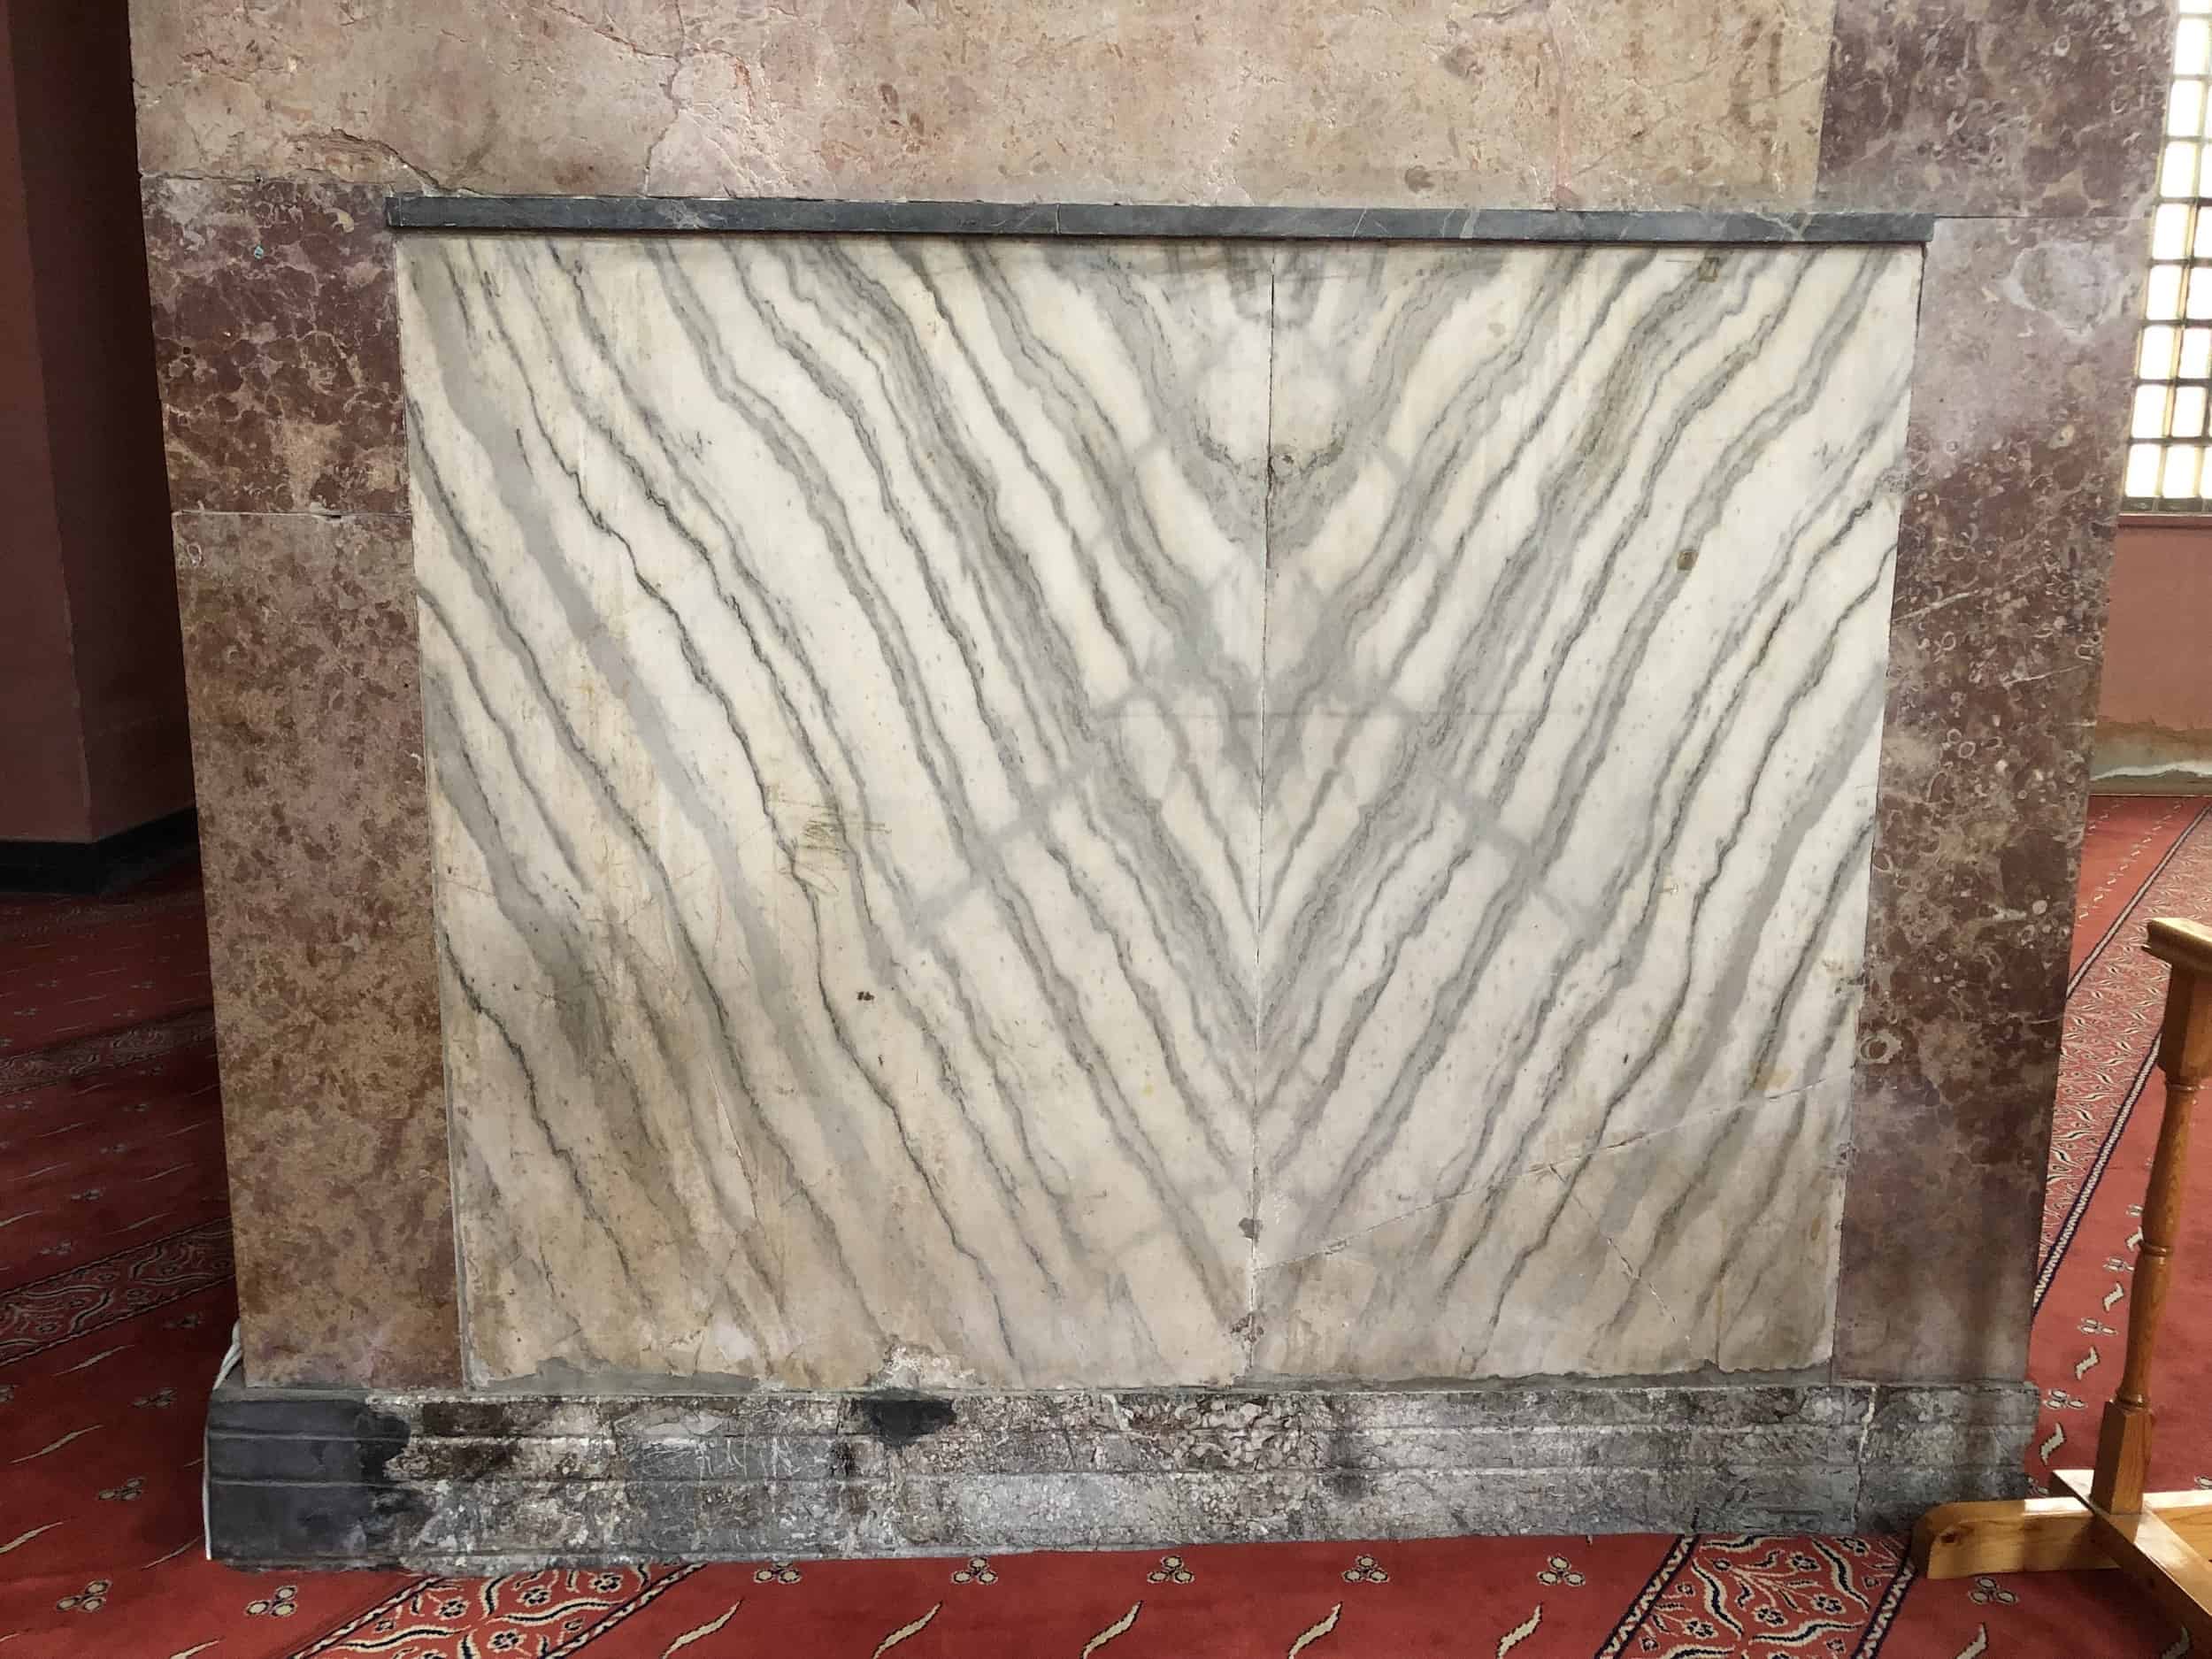 Marble panels in the Kalenderhane Mosque in Istanbul, Turkey